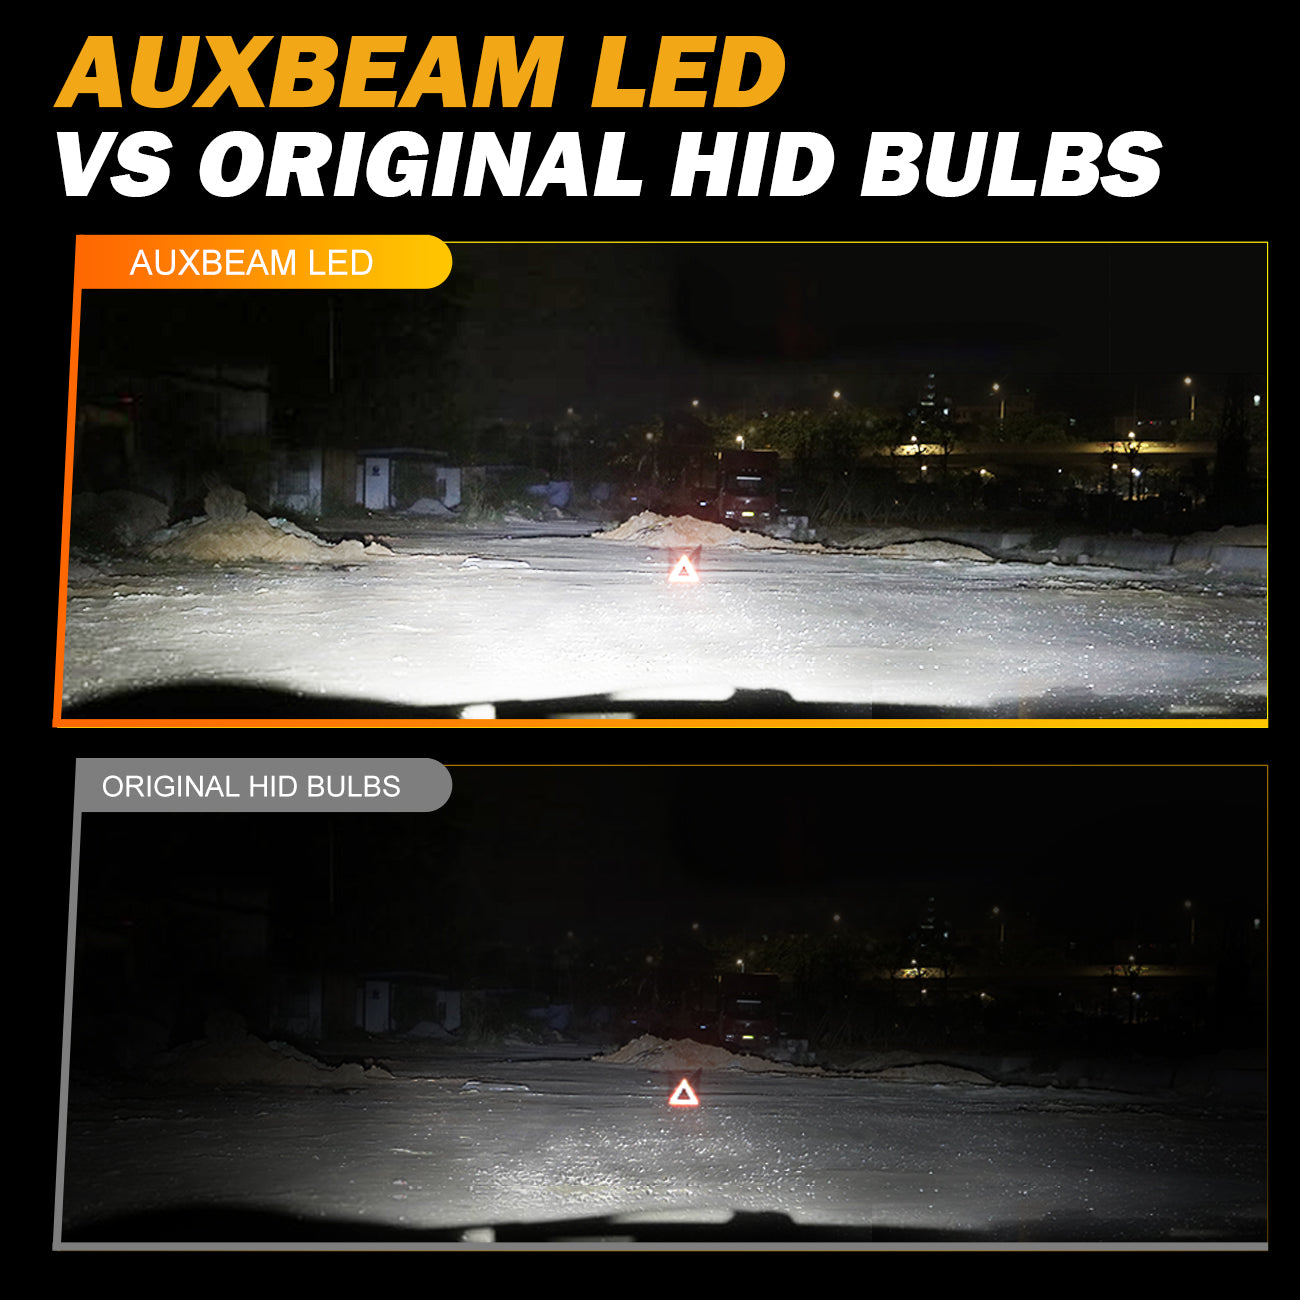 Alla Lighting CANBus D3R D3S LED Headlights Bulbs, Newest 90W 1:1 Plug-n-Play  Easy Installation Change HID Conversion Kits Headlamps, 12000 Lumens  6000K-6500K Xenon White (D3S/D3R/D3C) 